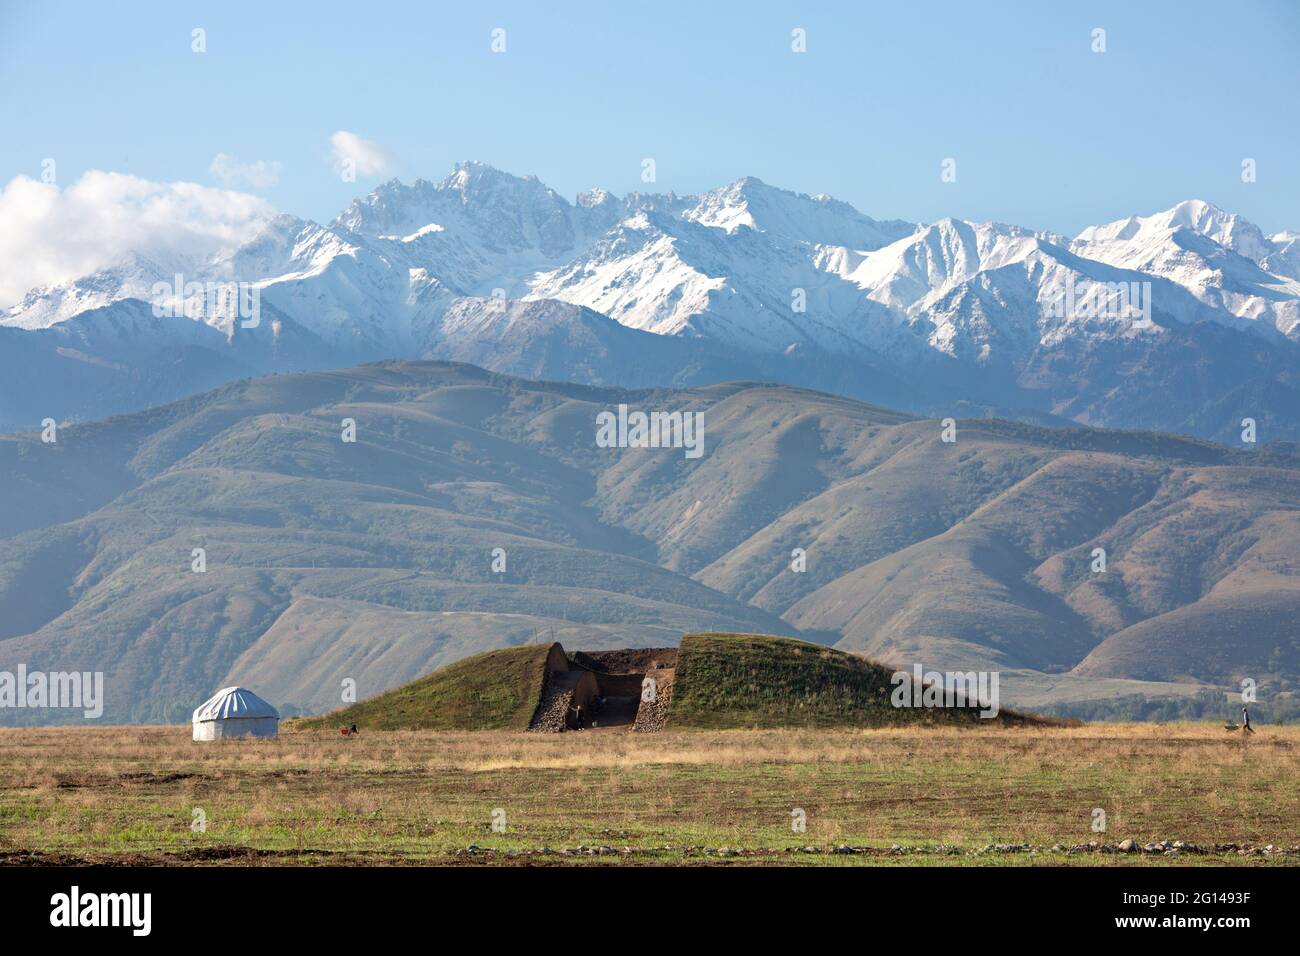 Archaeological excavations in a burial mound near the city of Almaty and a nomadic yurt, Almaty, Kazakhstan Stock Photo